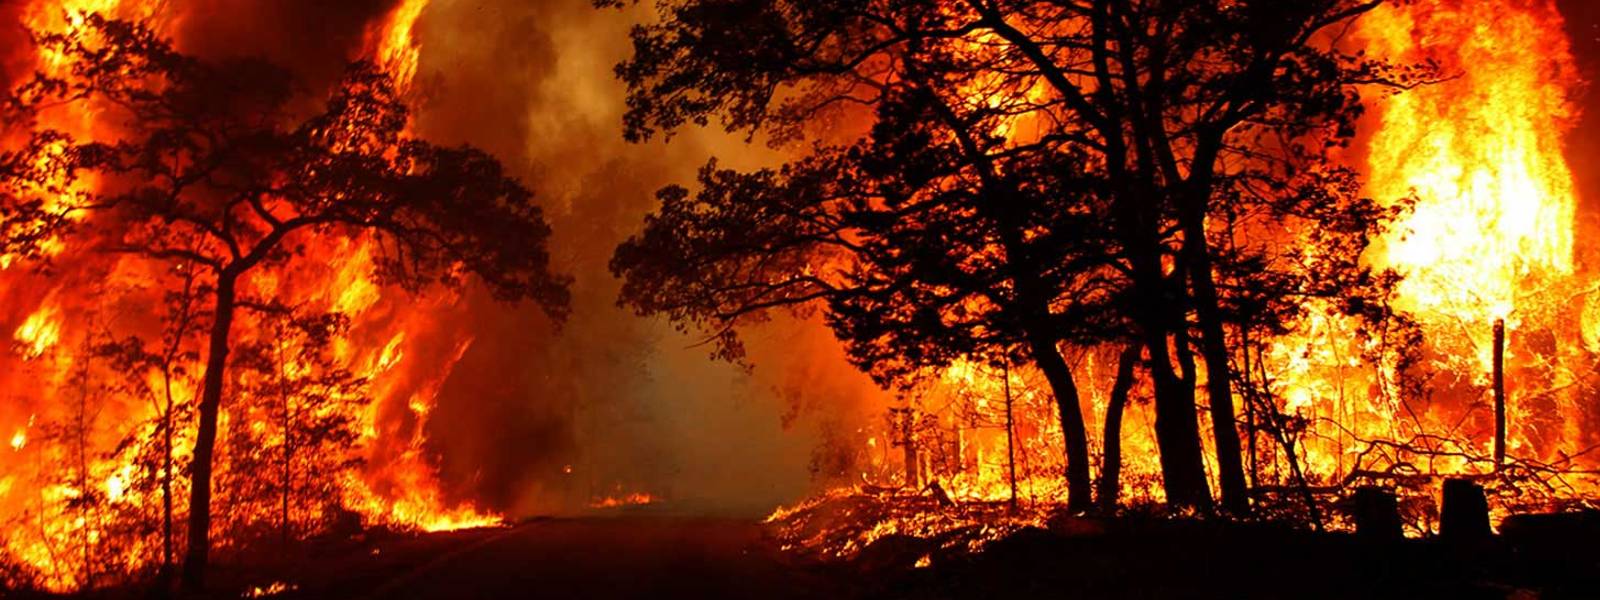 Increase in forest fires reported due to dry weather